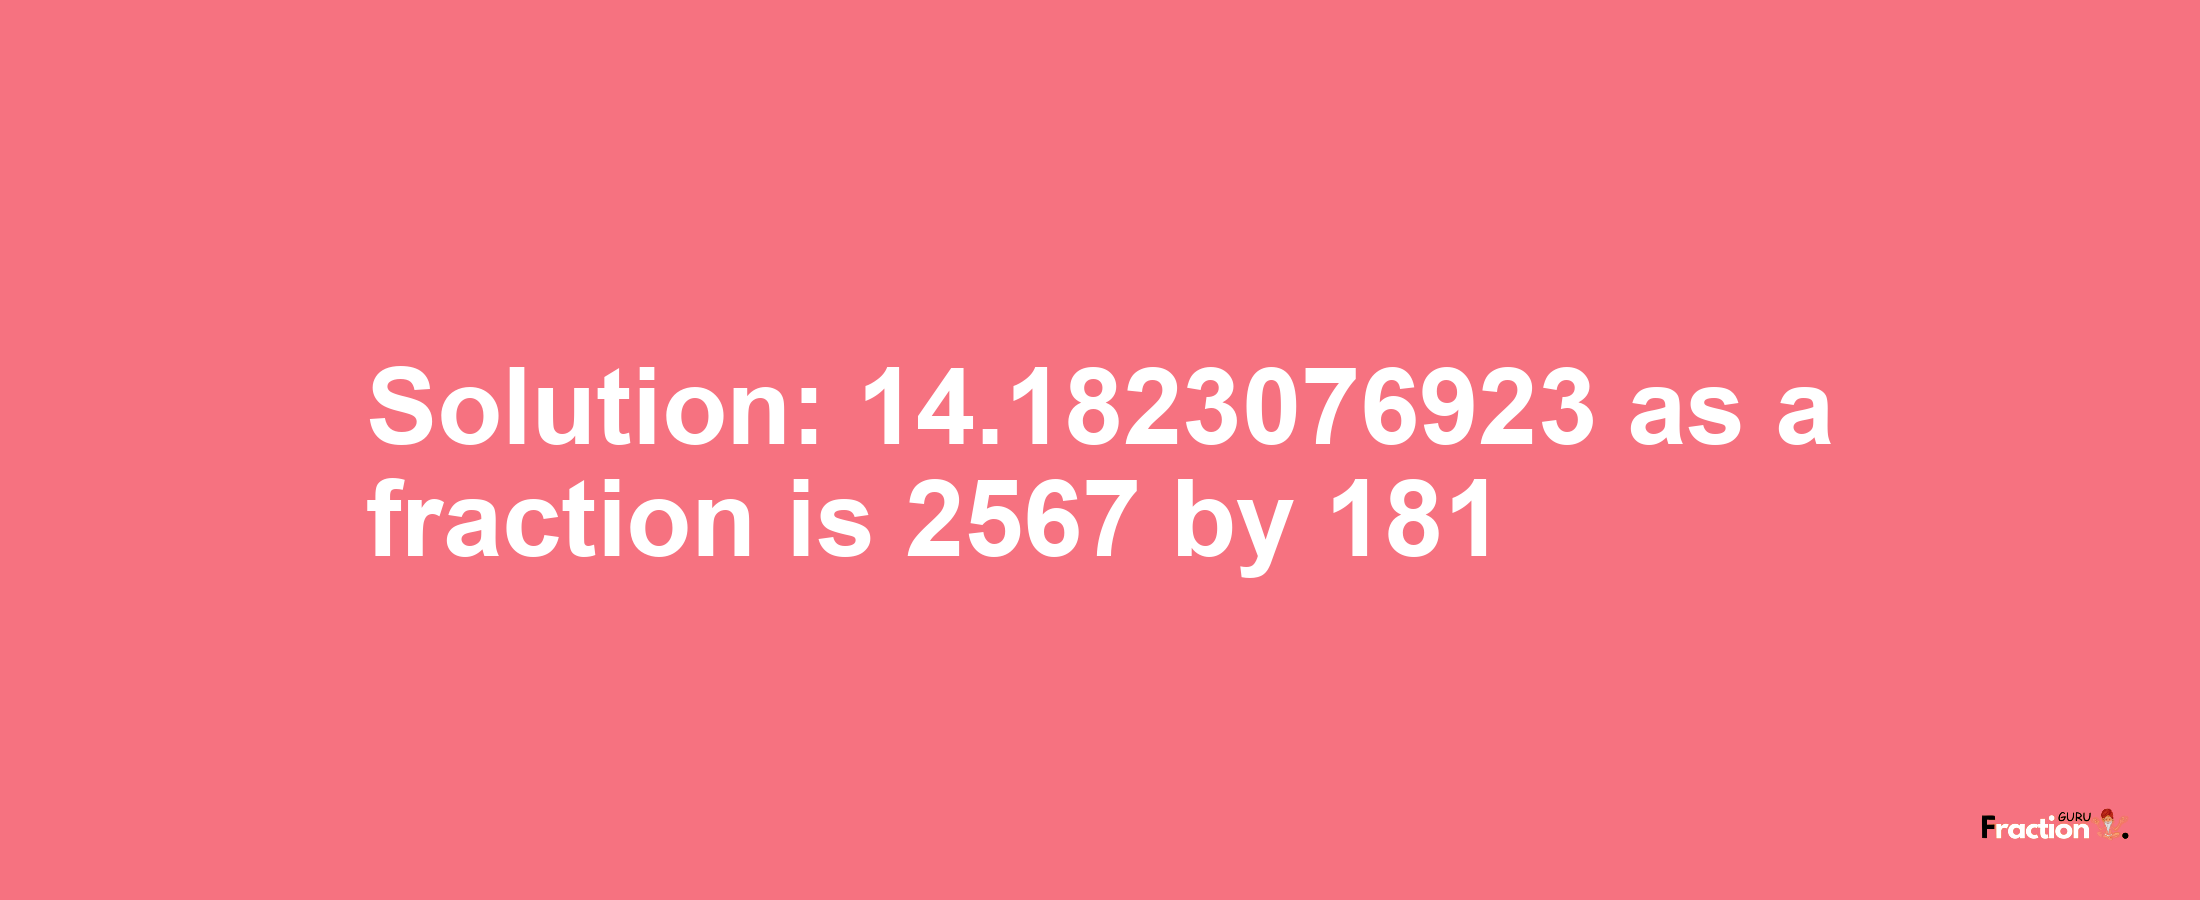 Solution:14.1823076923 as a fraction is 2567/181